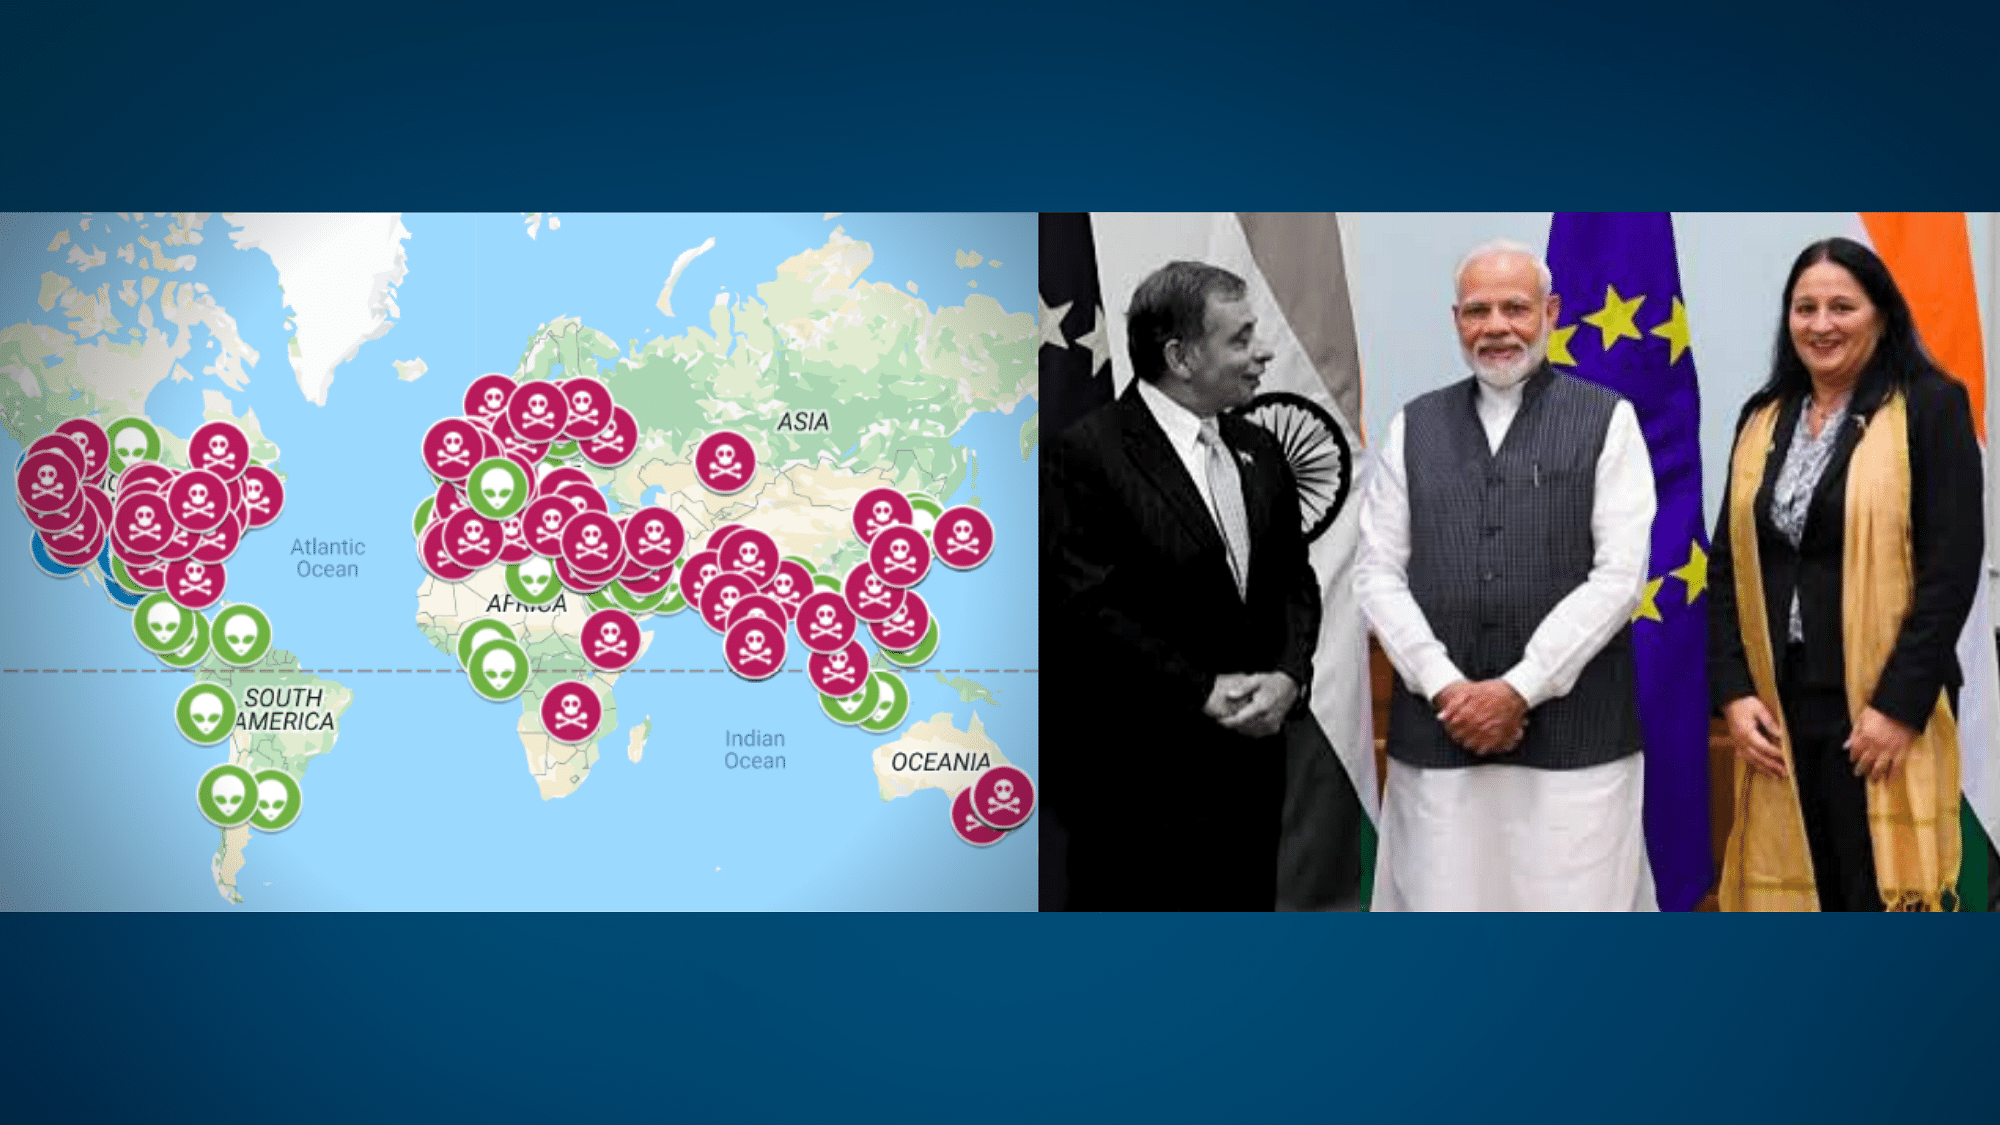 The visit by several MEPs to Kashmir and their meeting with PM Modi is reportedly linked to a network of 265 fake local media sites run by a Indian influence group.